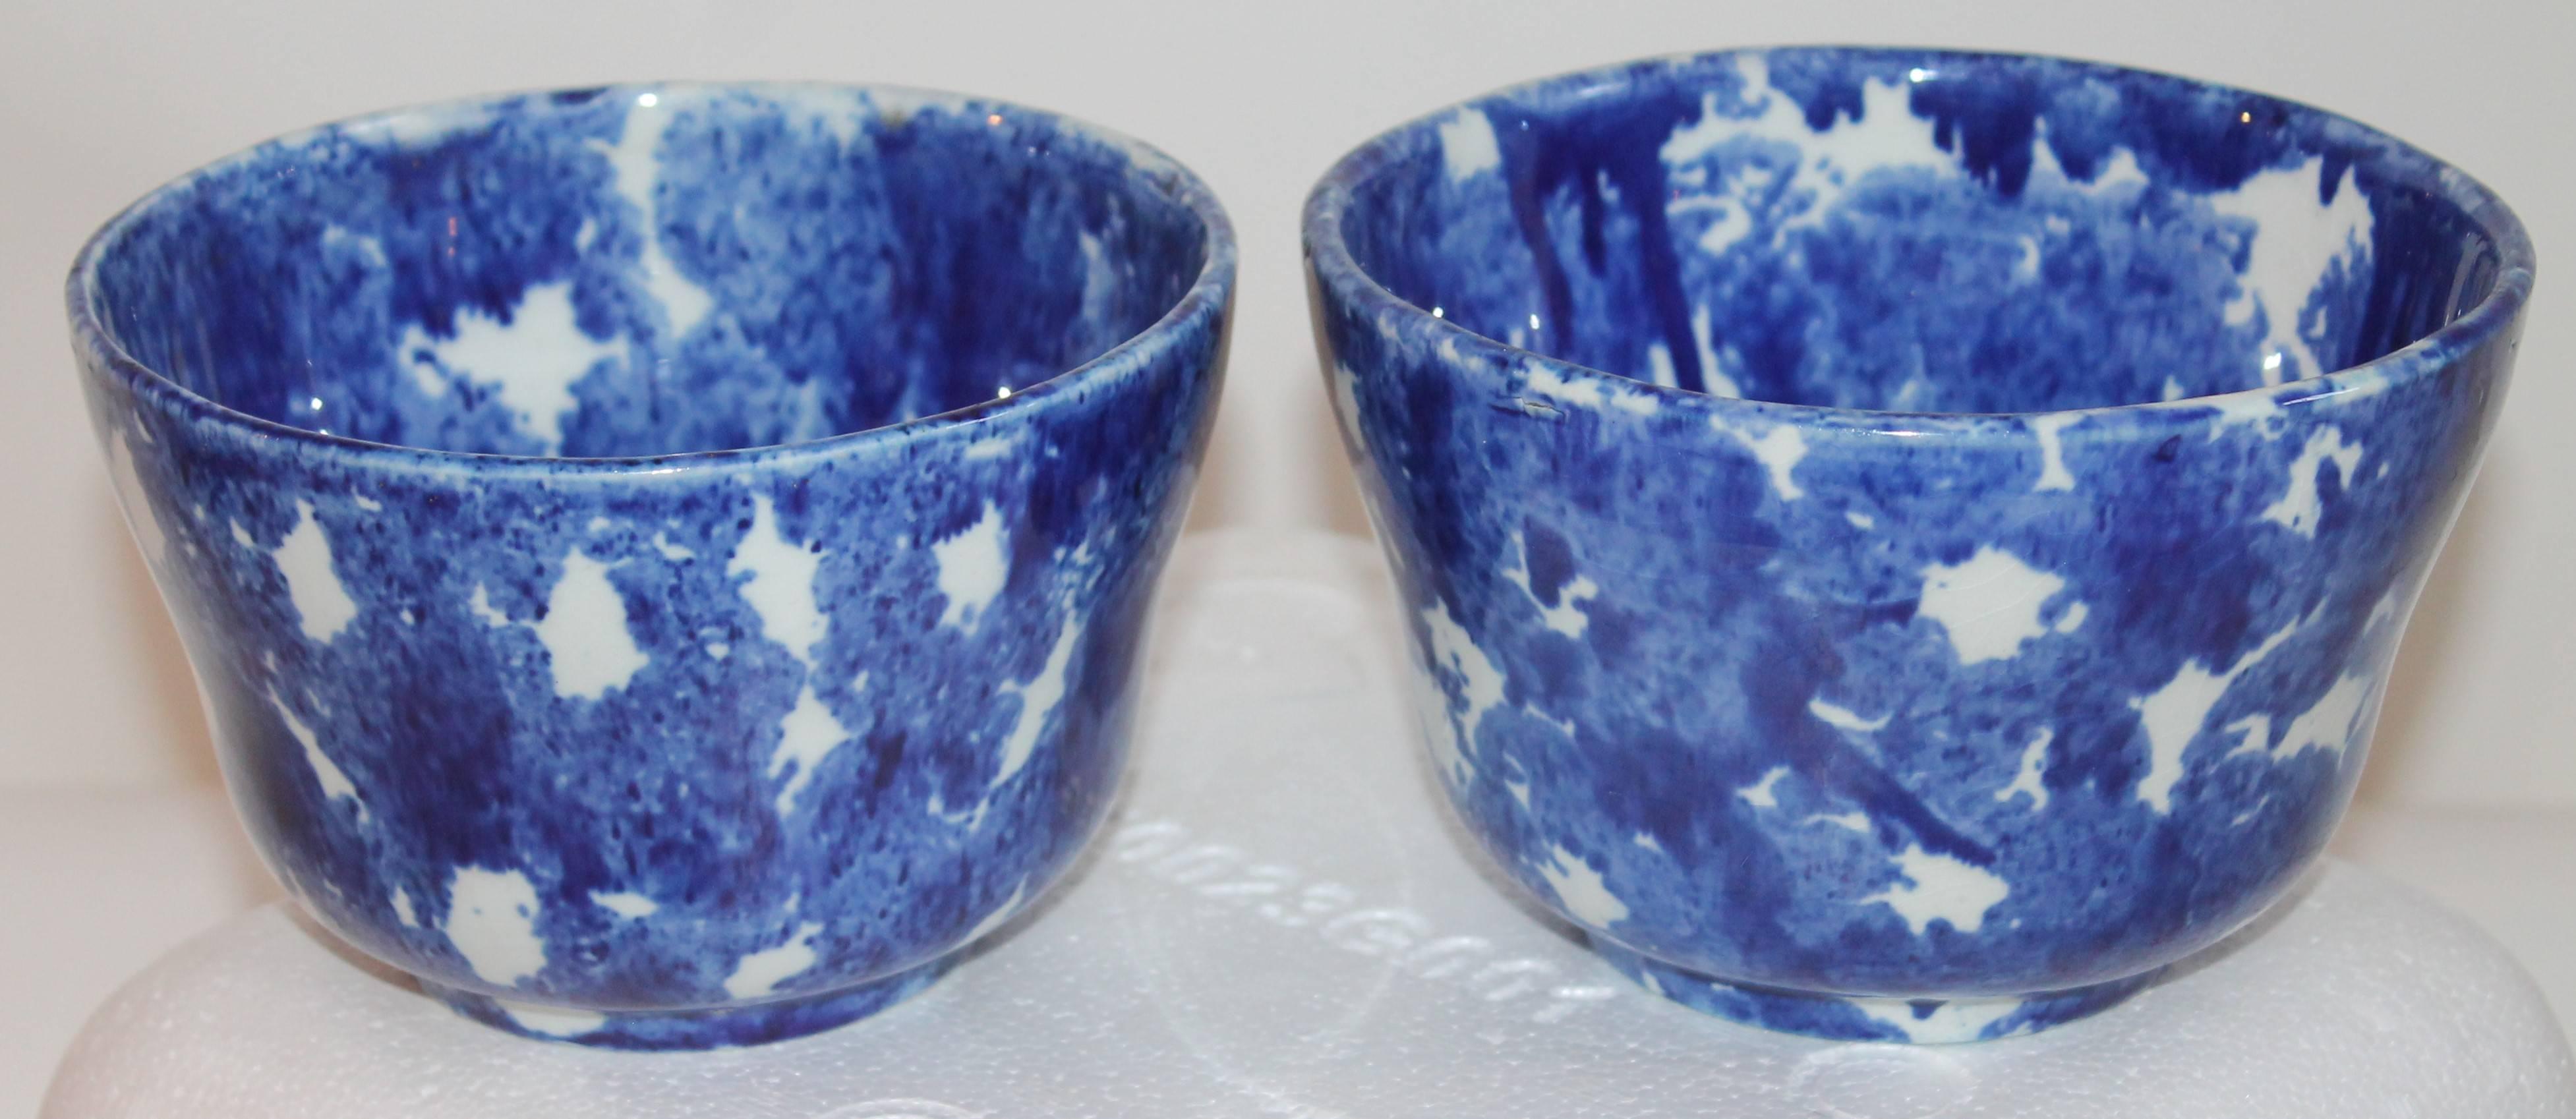 Country Sponge Ware Pottery Waste Bowls, Pair For Sale